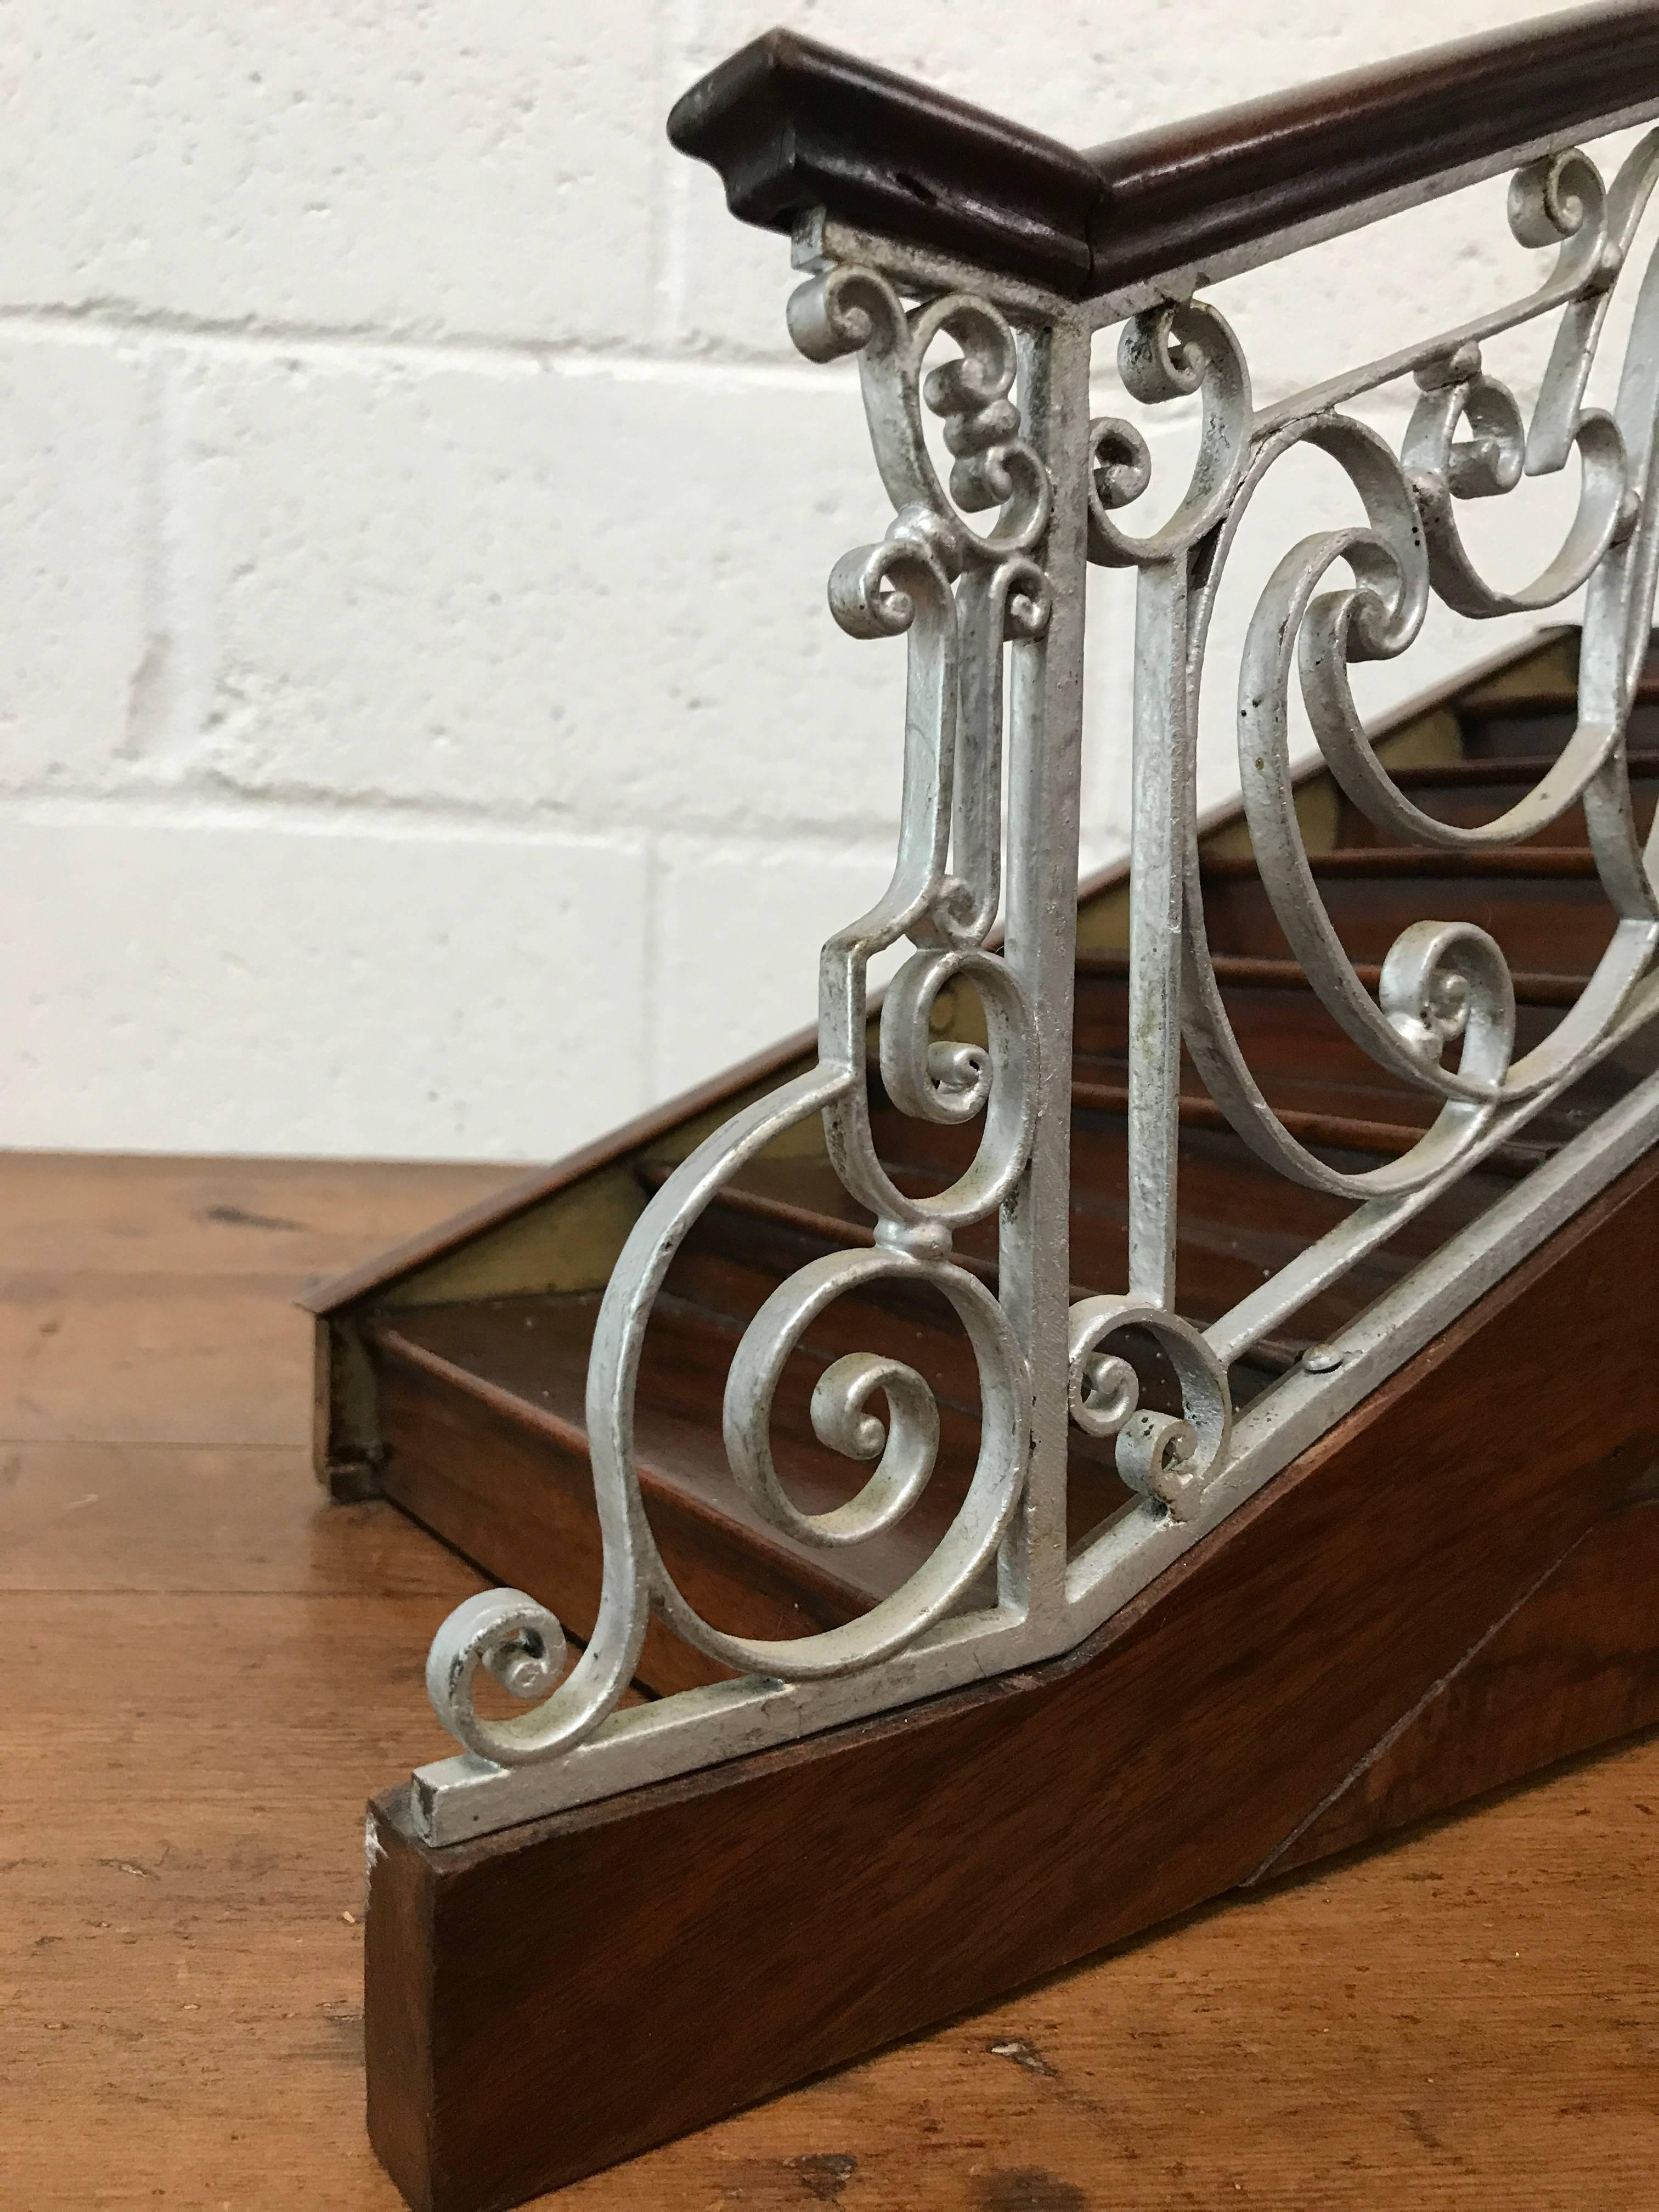 A fantastic original stair case model from a French railing shop to advertise their quality of work. Made from mahogany and polychrome marble look paint and railings from cast iron. The brass plaque is not original and has been added at a later date